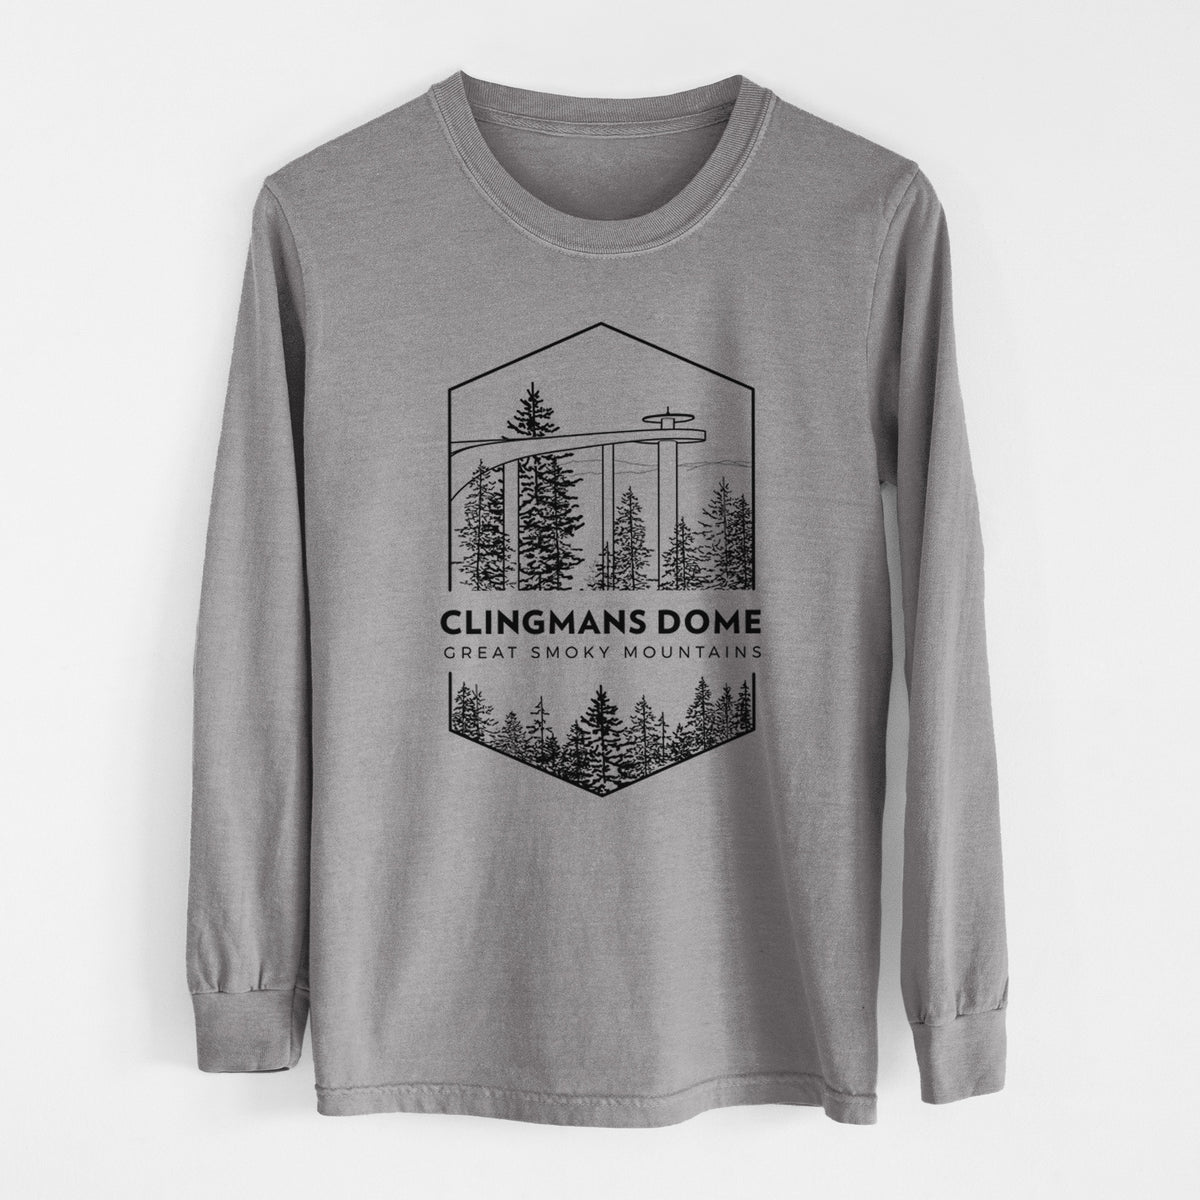 Clingmans Dome - Great Smoky Mountains National Park - Heavyweight 100% Cotton Long Sleeve